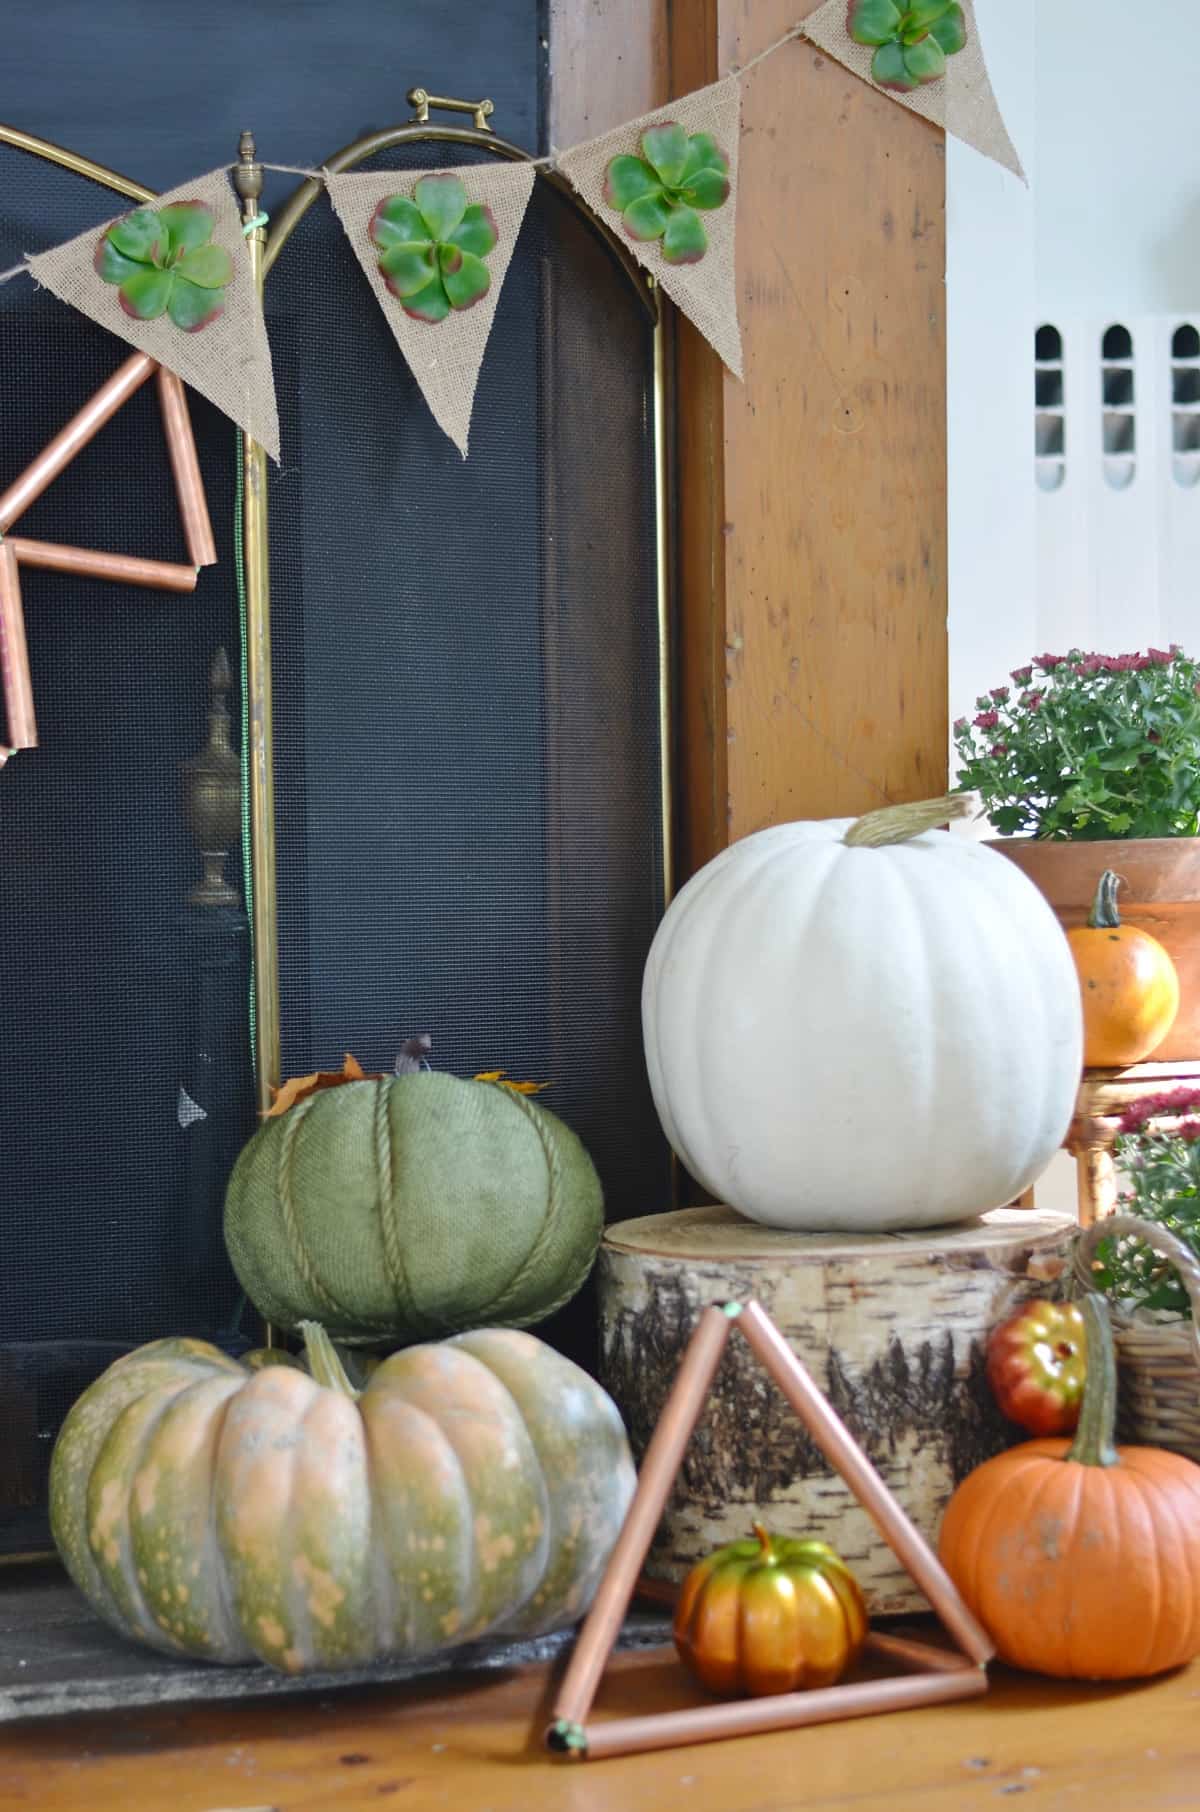 Fall harvest mantel with pumpkins and gourds and succulents.